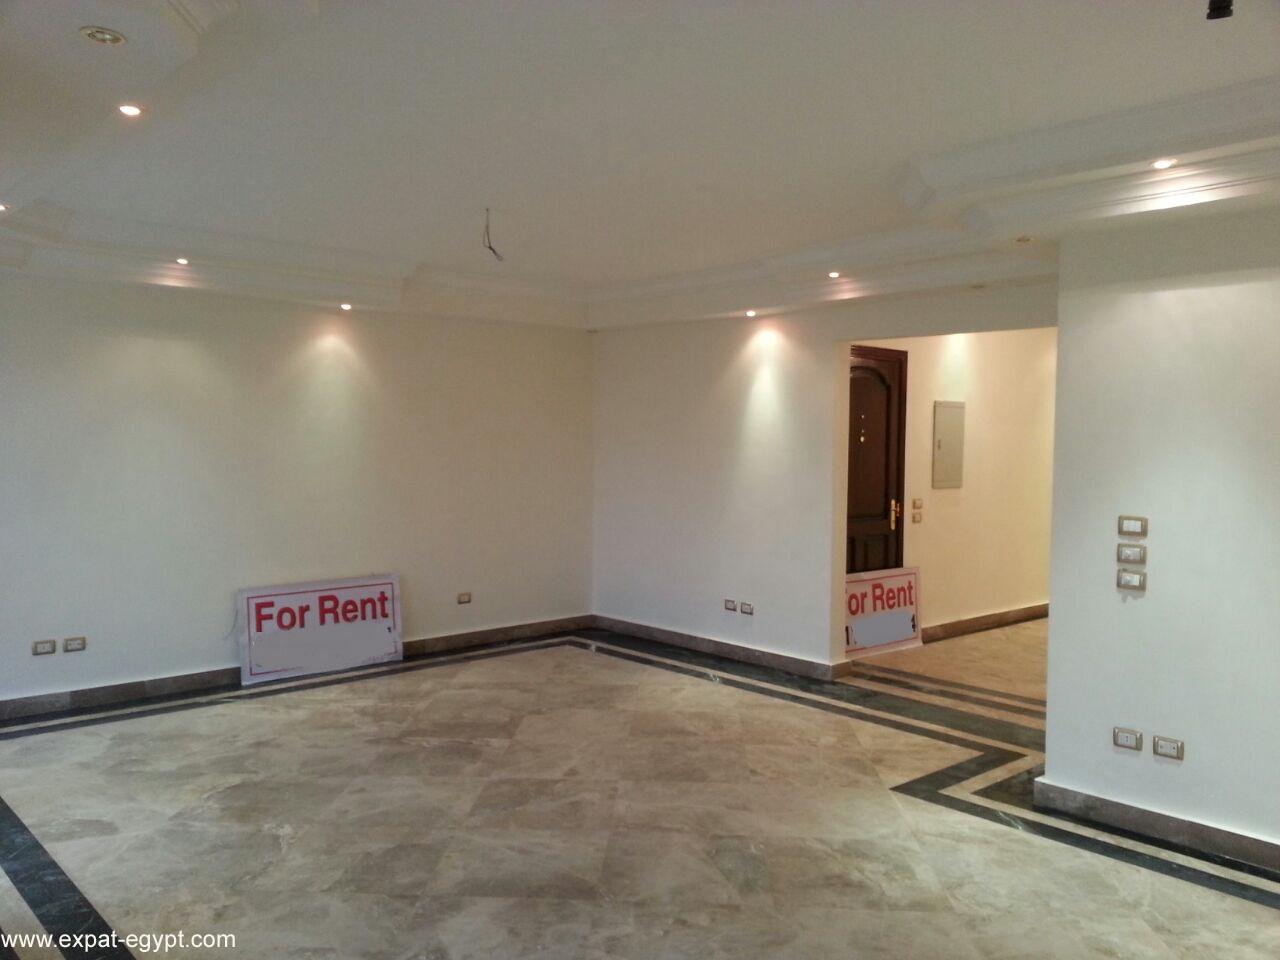 Apartment for Rent in Beverly Hills, Sheikh Zayed, Egypt